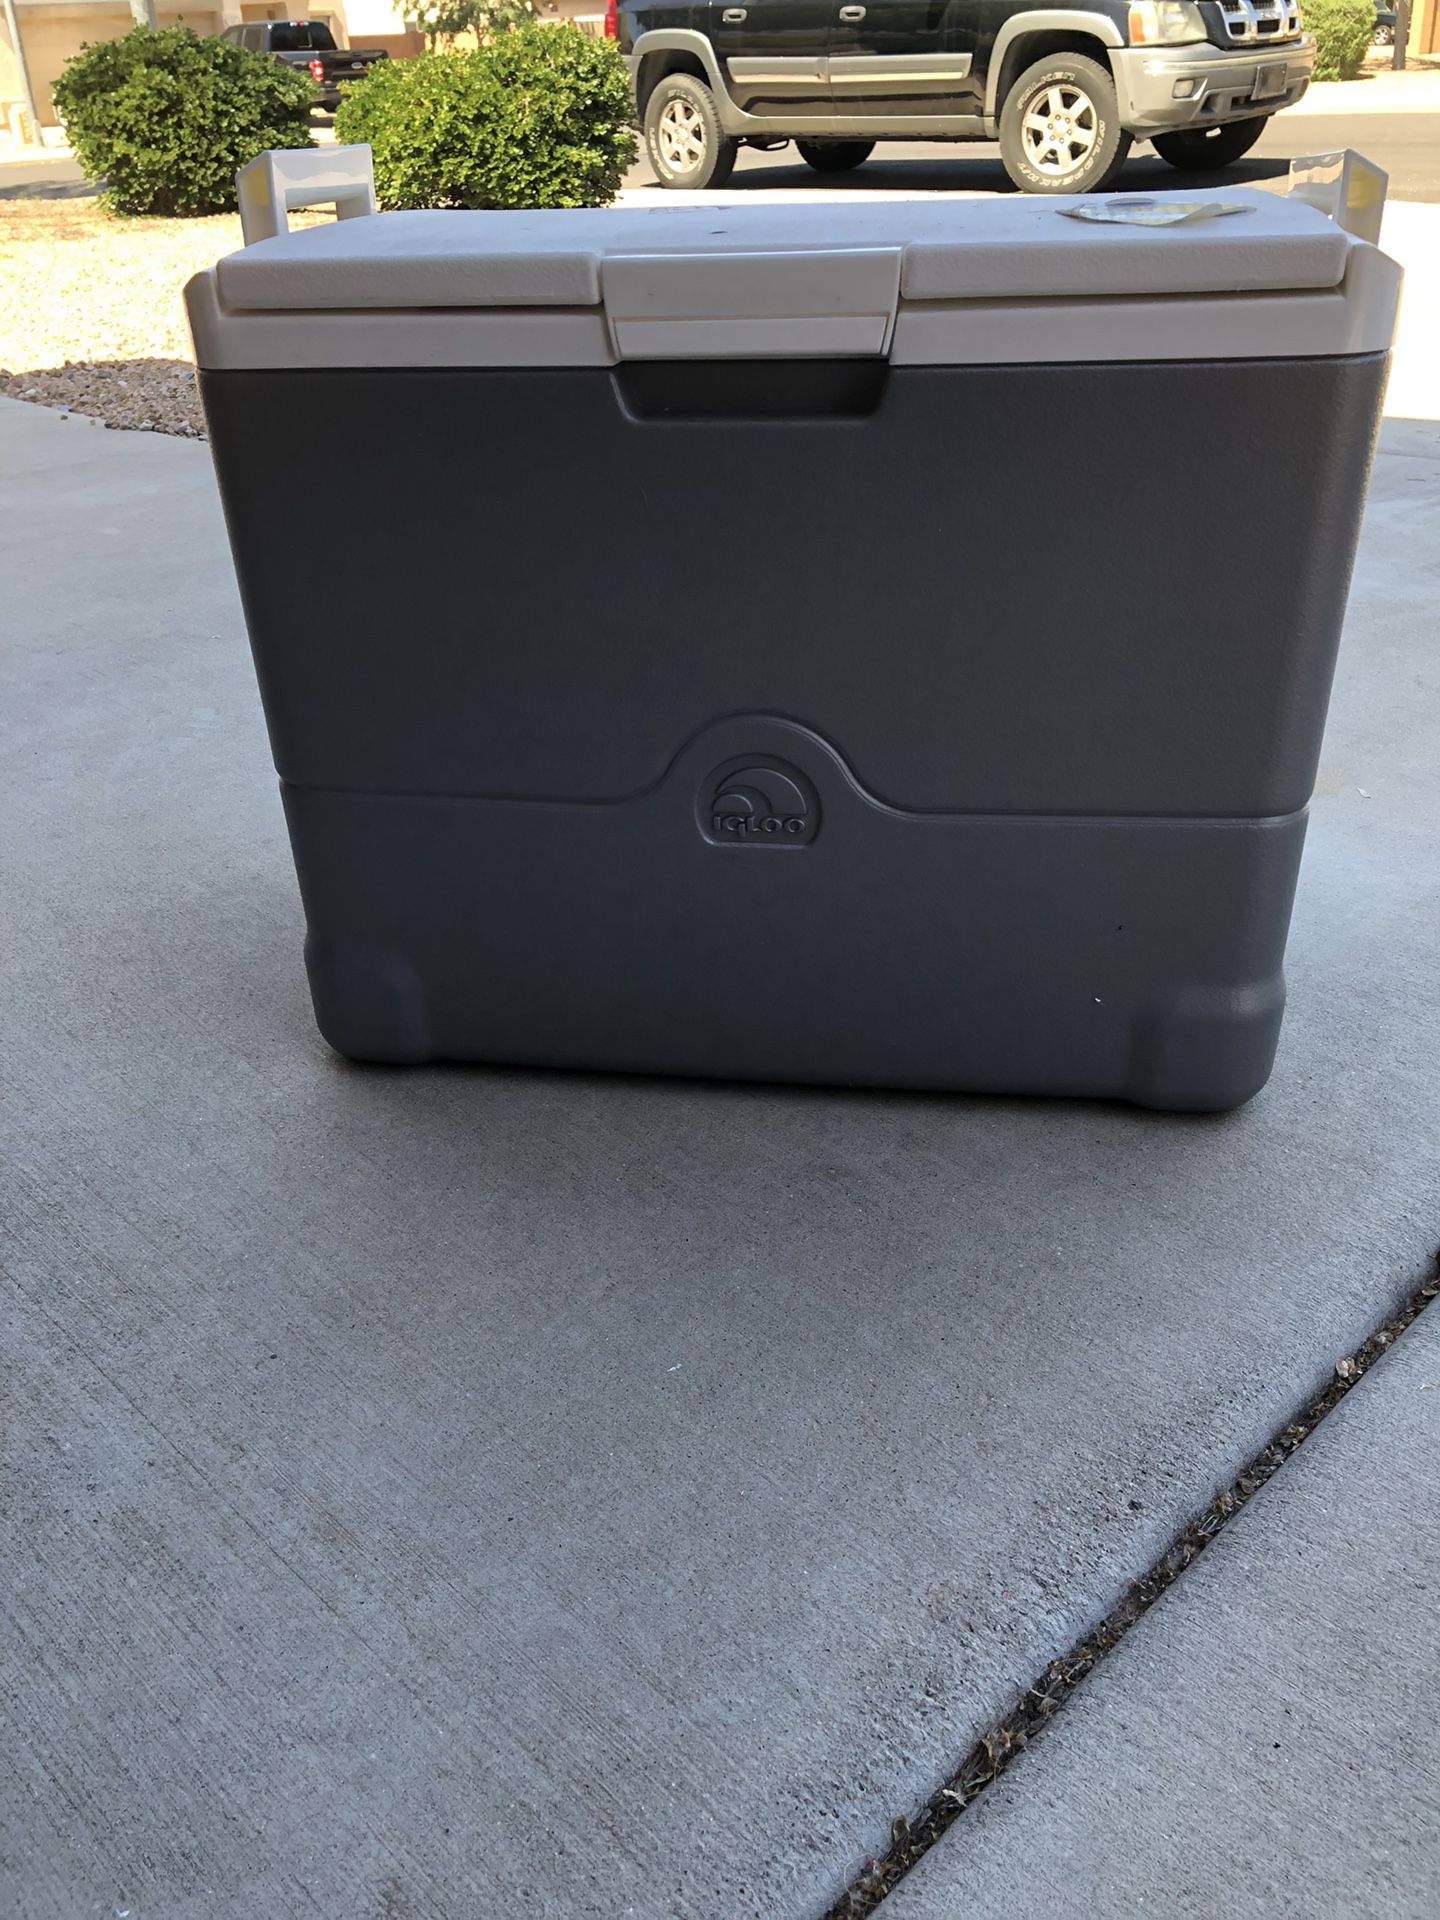 Cooler for your car!